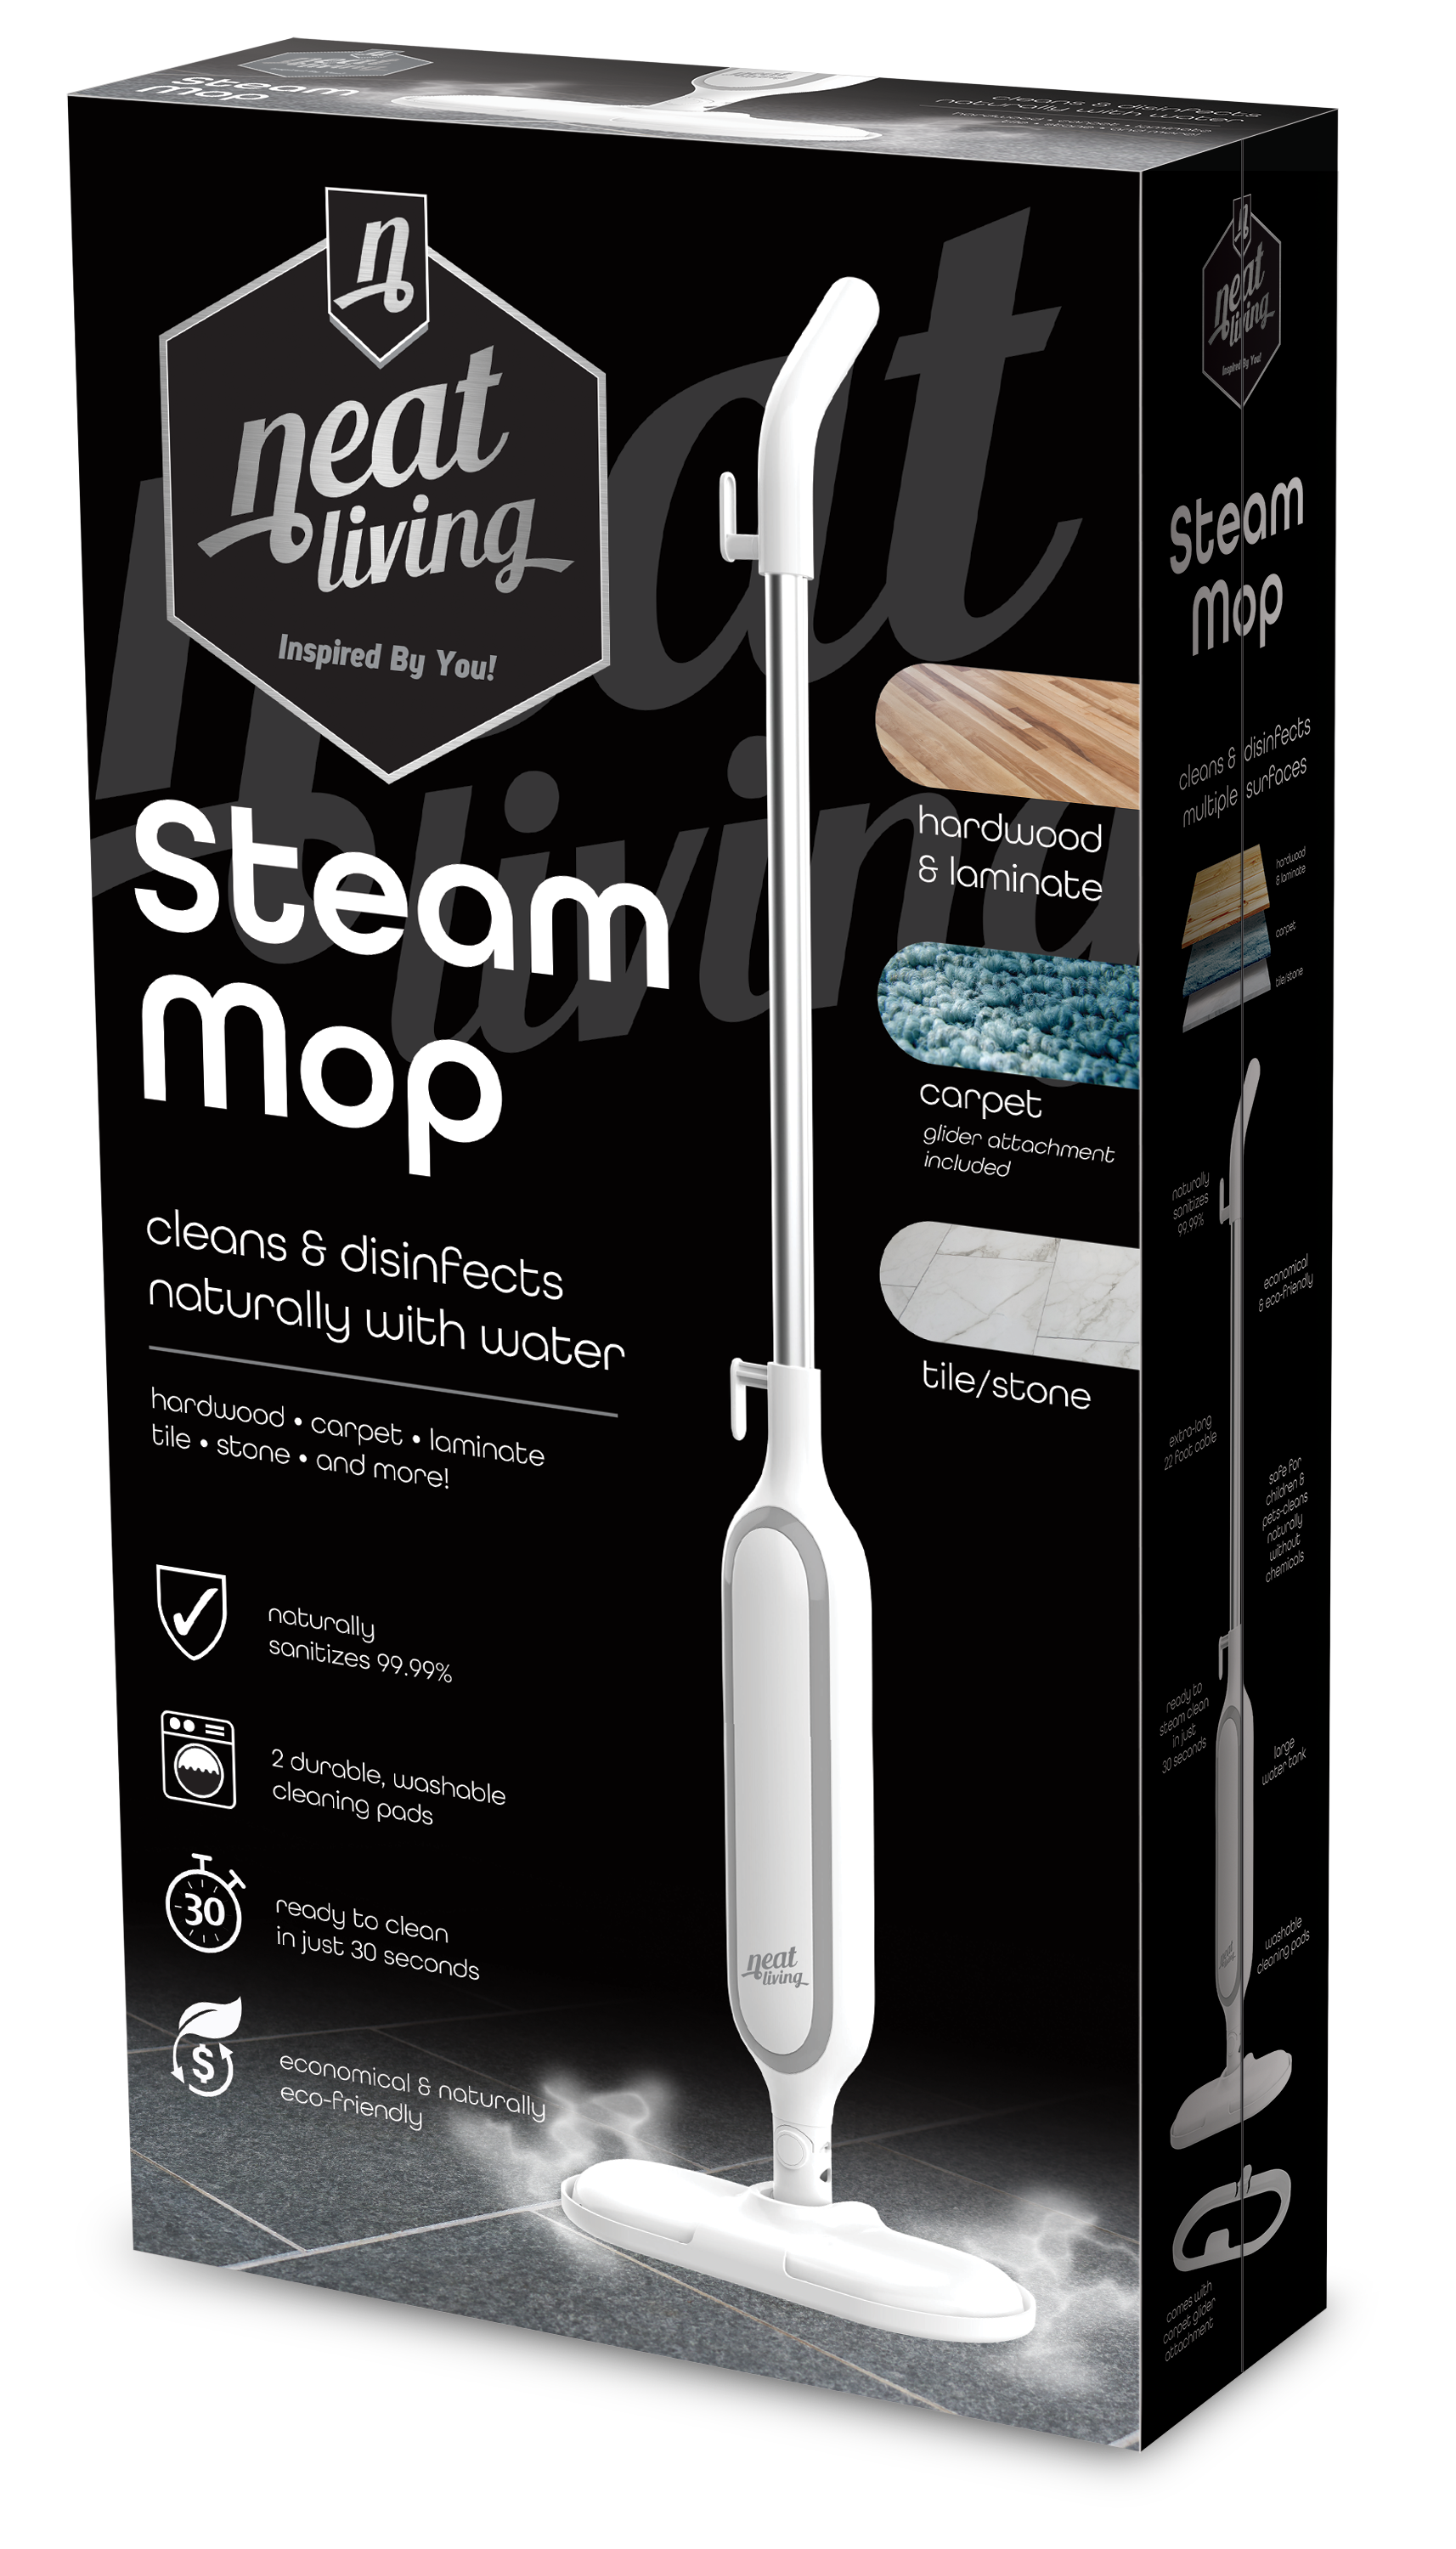 Neat-Living Steam Mop with 2 Dirt Grip Pads, Lightweight, Safe for all Sealed Hard Floors like Tile, Hardwood, Stone, Laminate, Vinyl & More